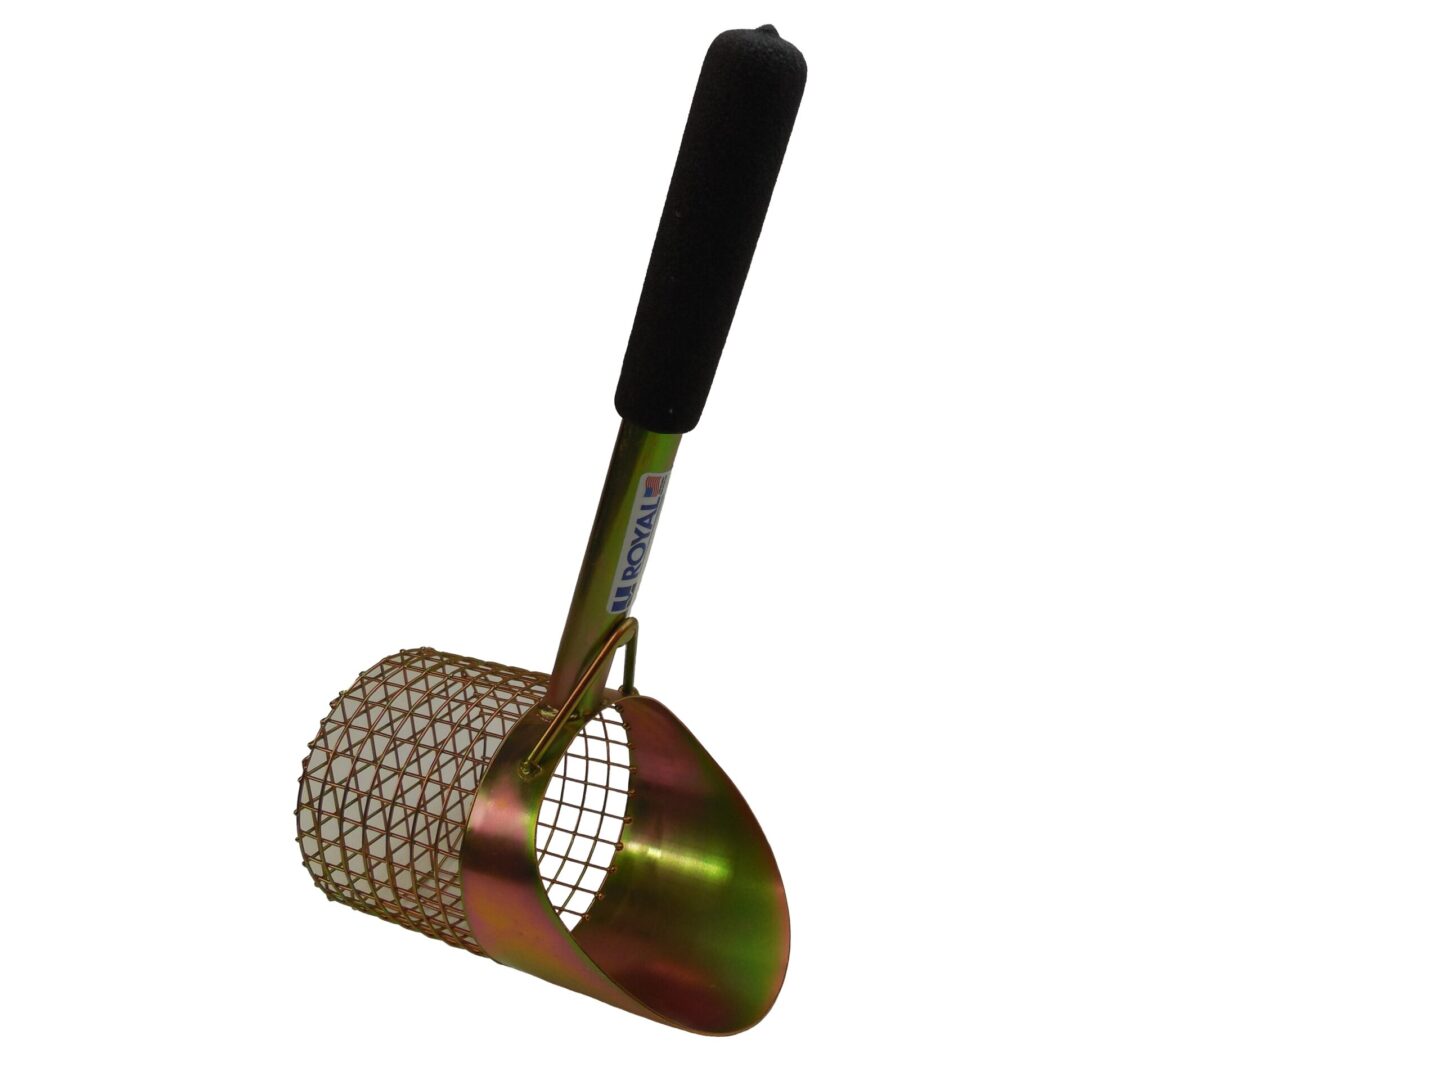 A Sand Scoop for Metal Detecting 15-inch long 5-inch diameter basket 7-1/2 deep with perforated bill with a handle on a white background.